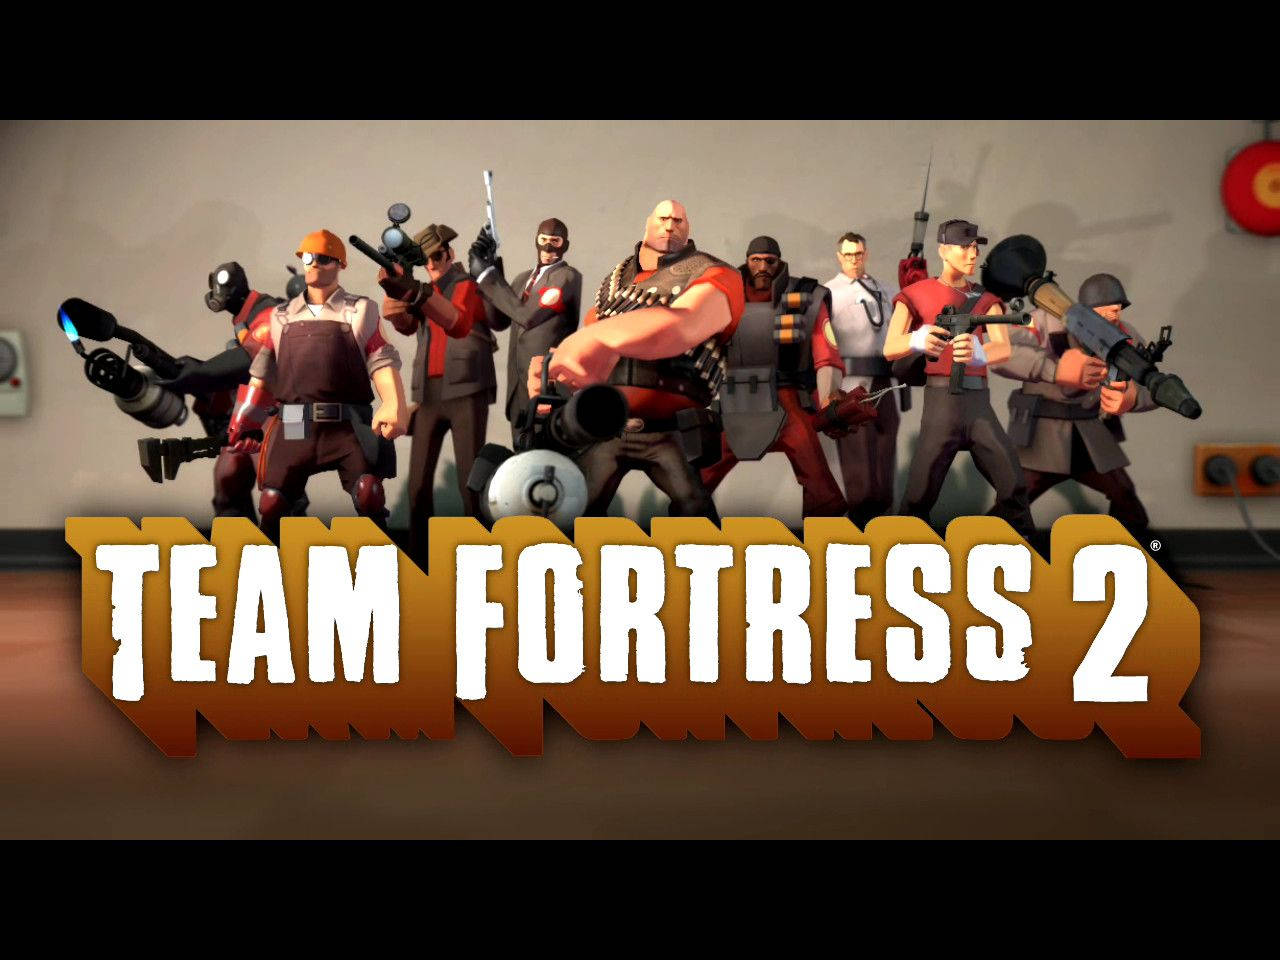 Team Fortress 2 Players Poster Background